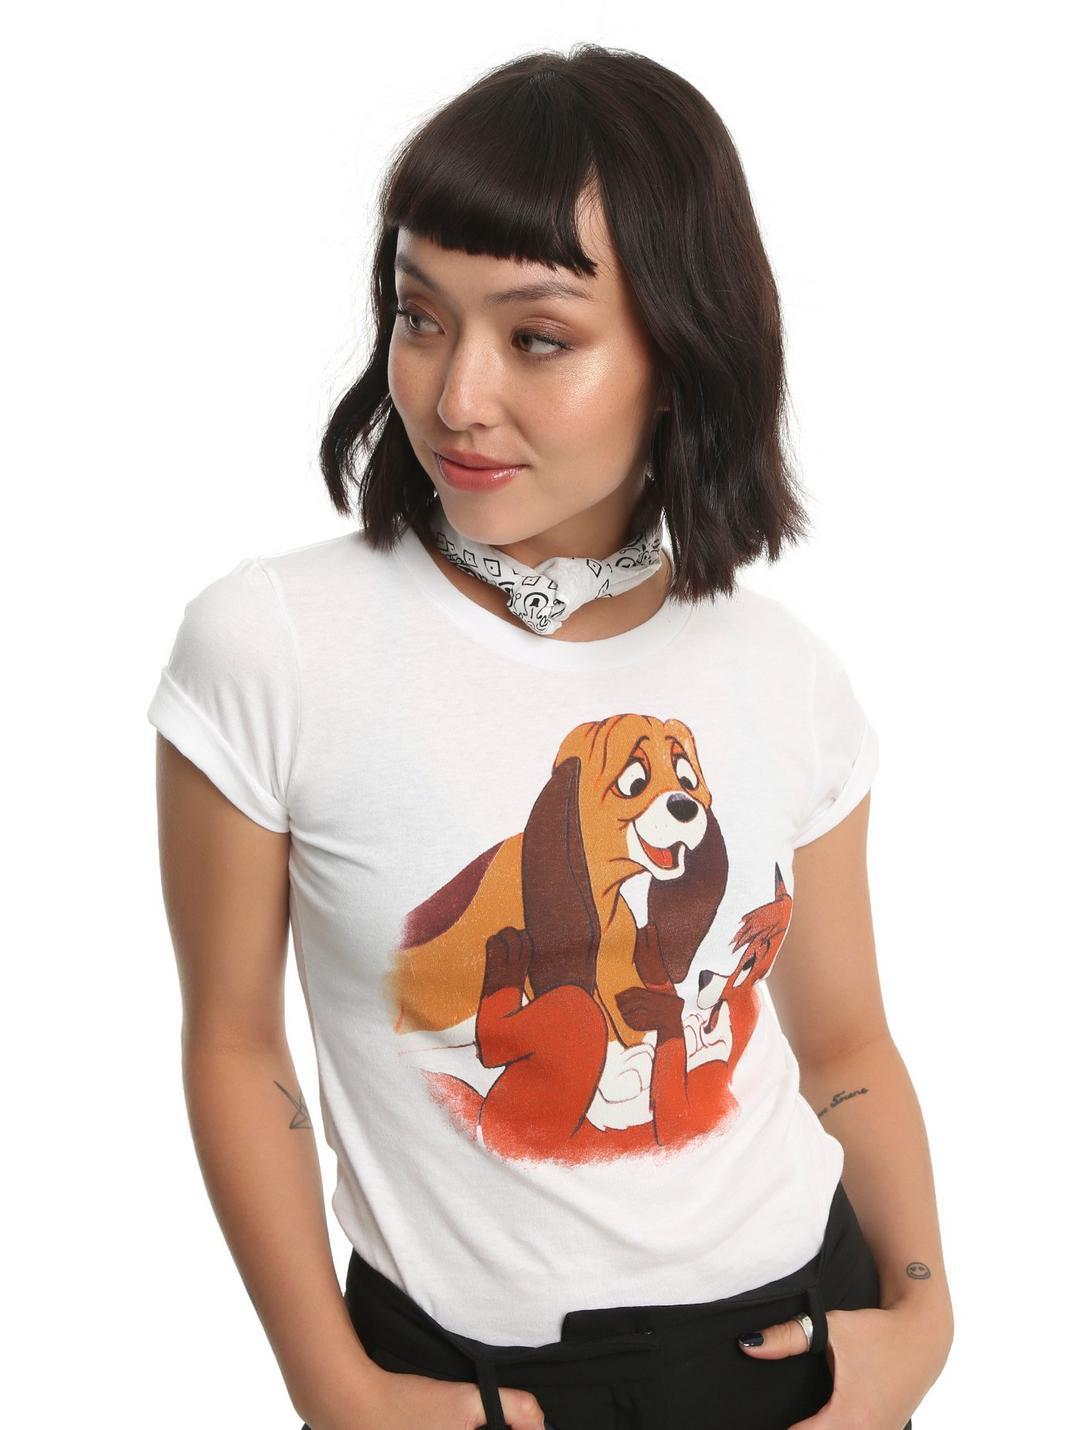 Disney The Fox And The Hound Tod And Copper Girls T-Shirt, WHITE, hi-res